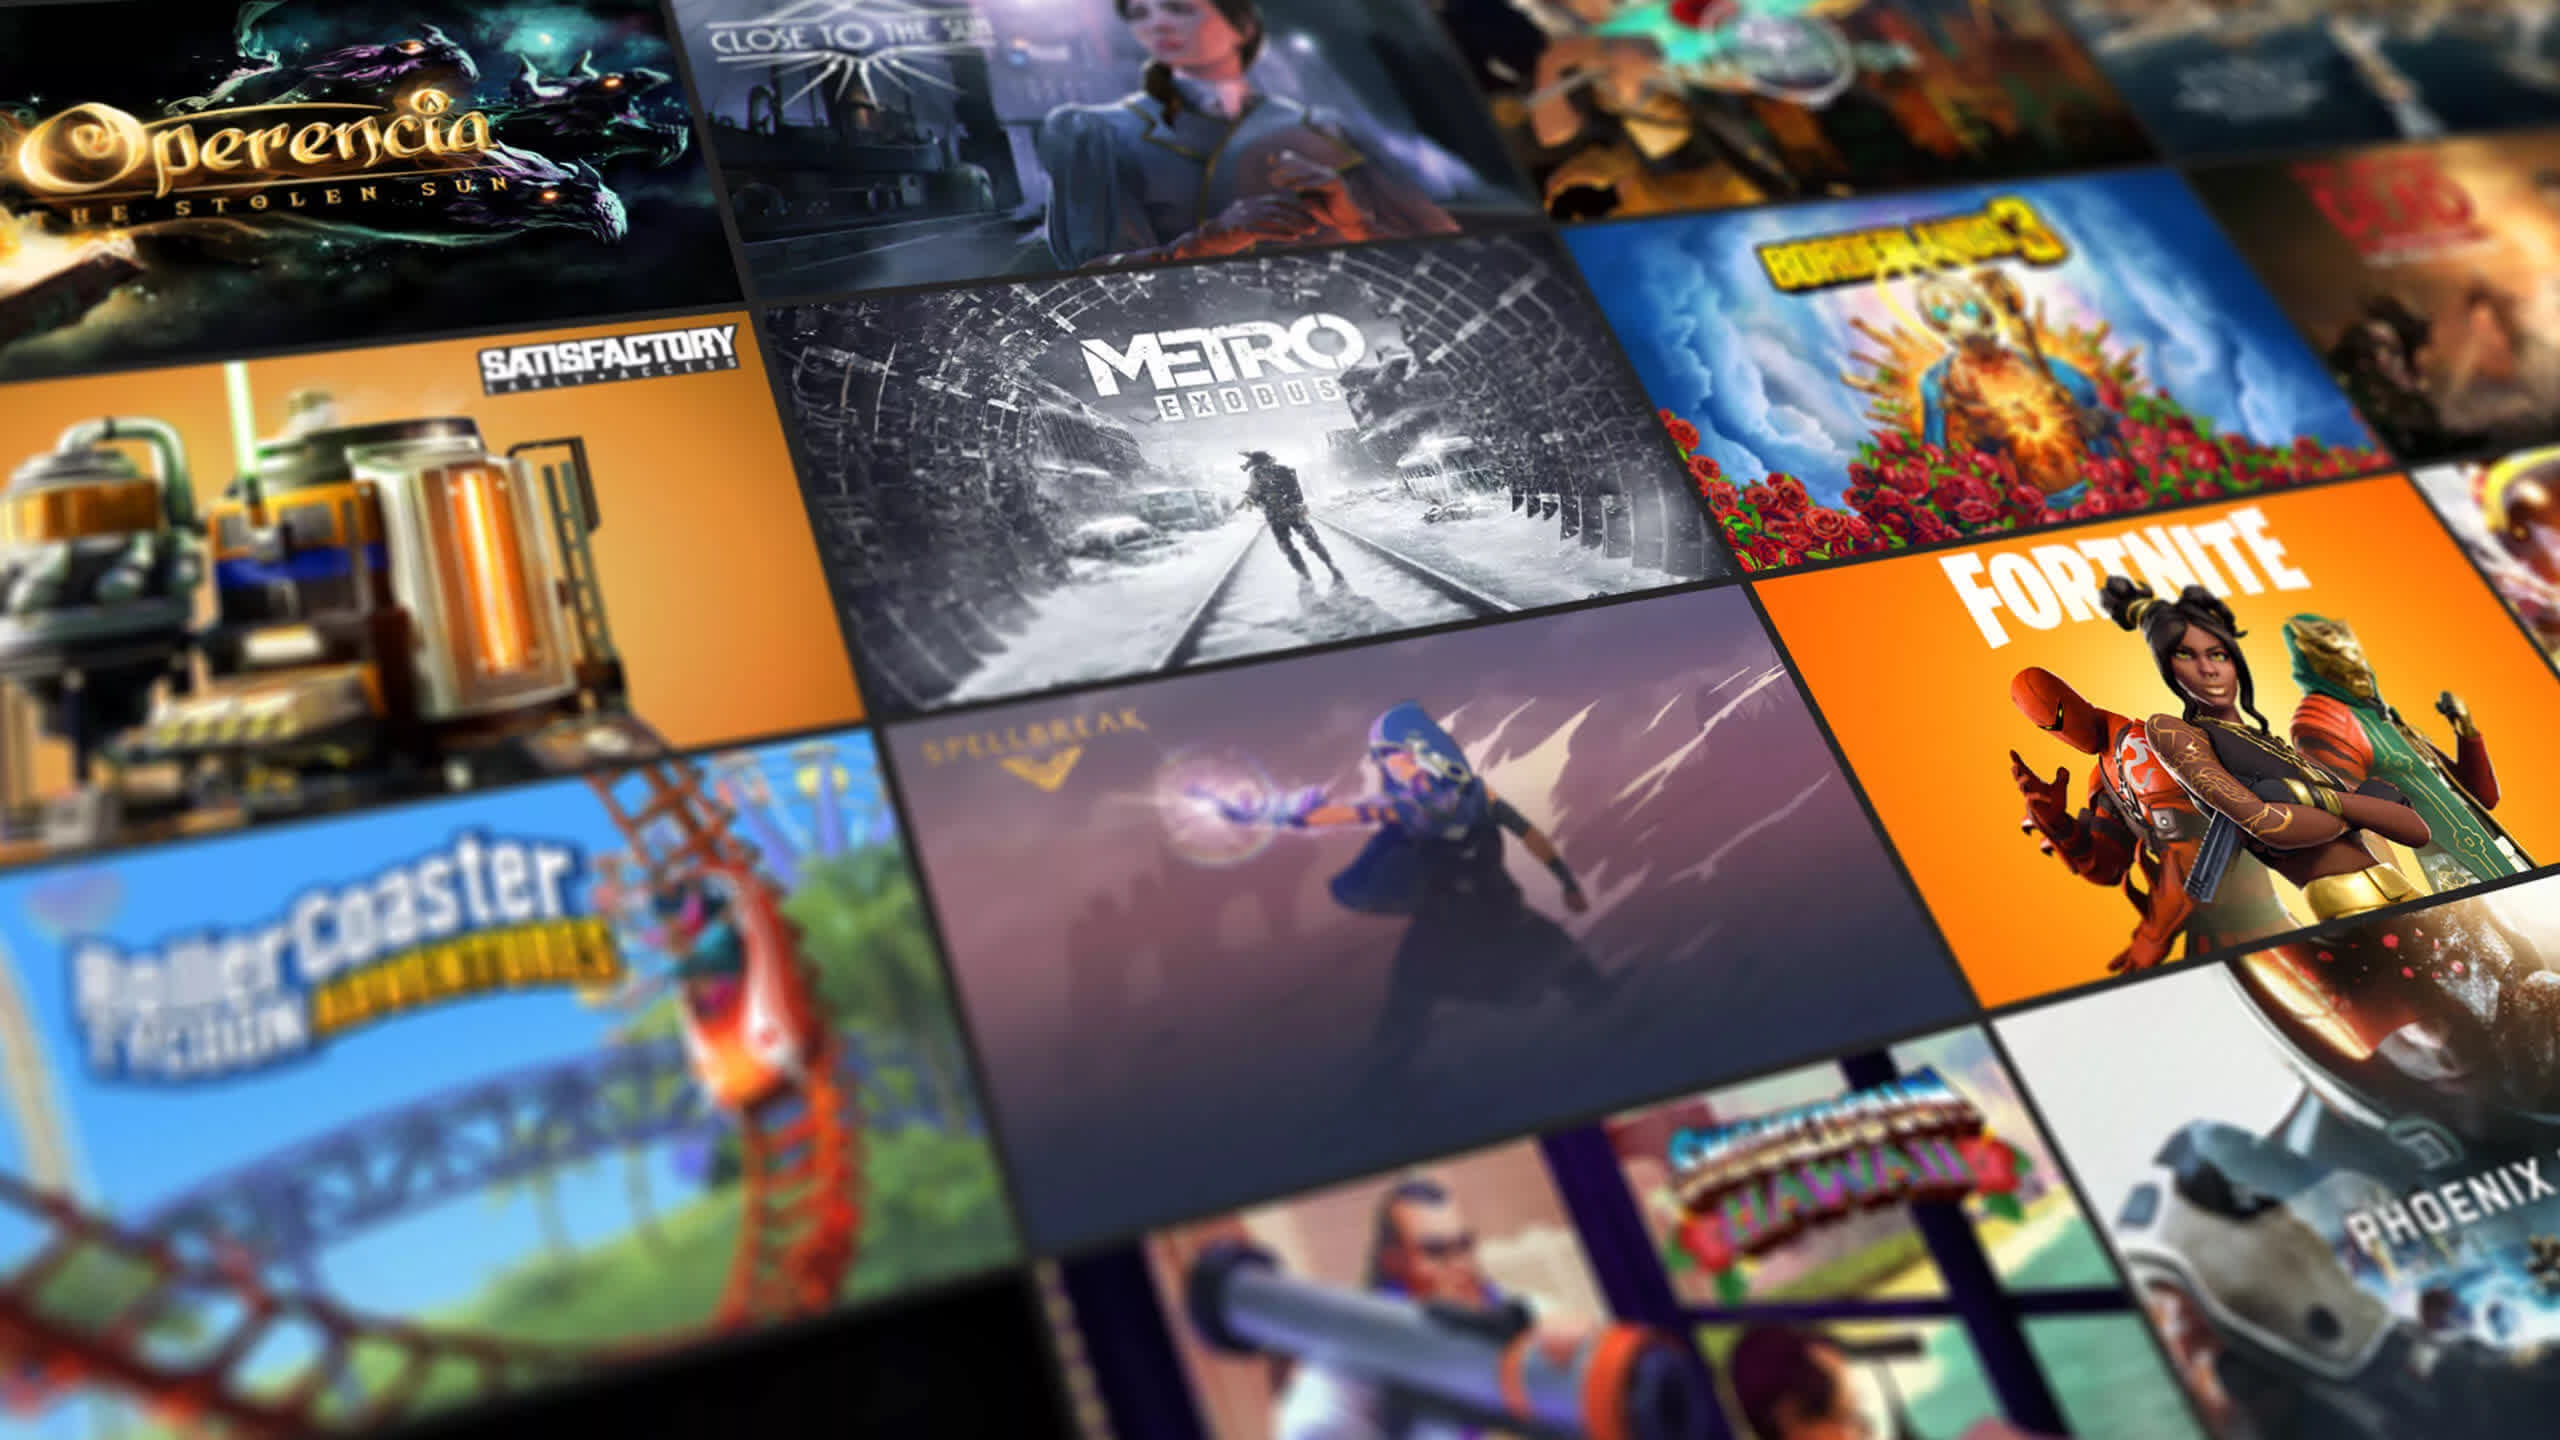 About five years later, the Epic Games Store is still not profitable